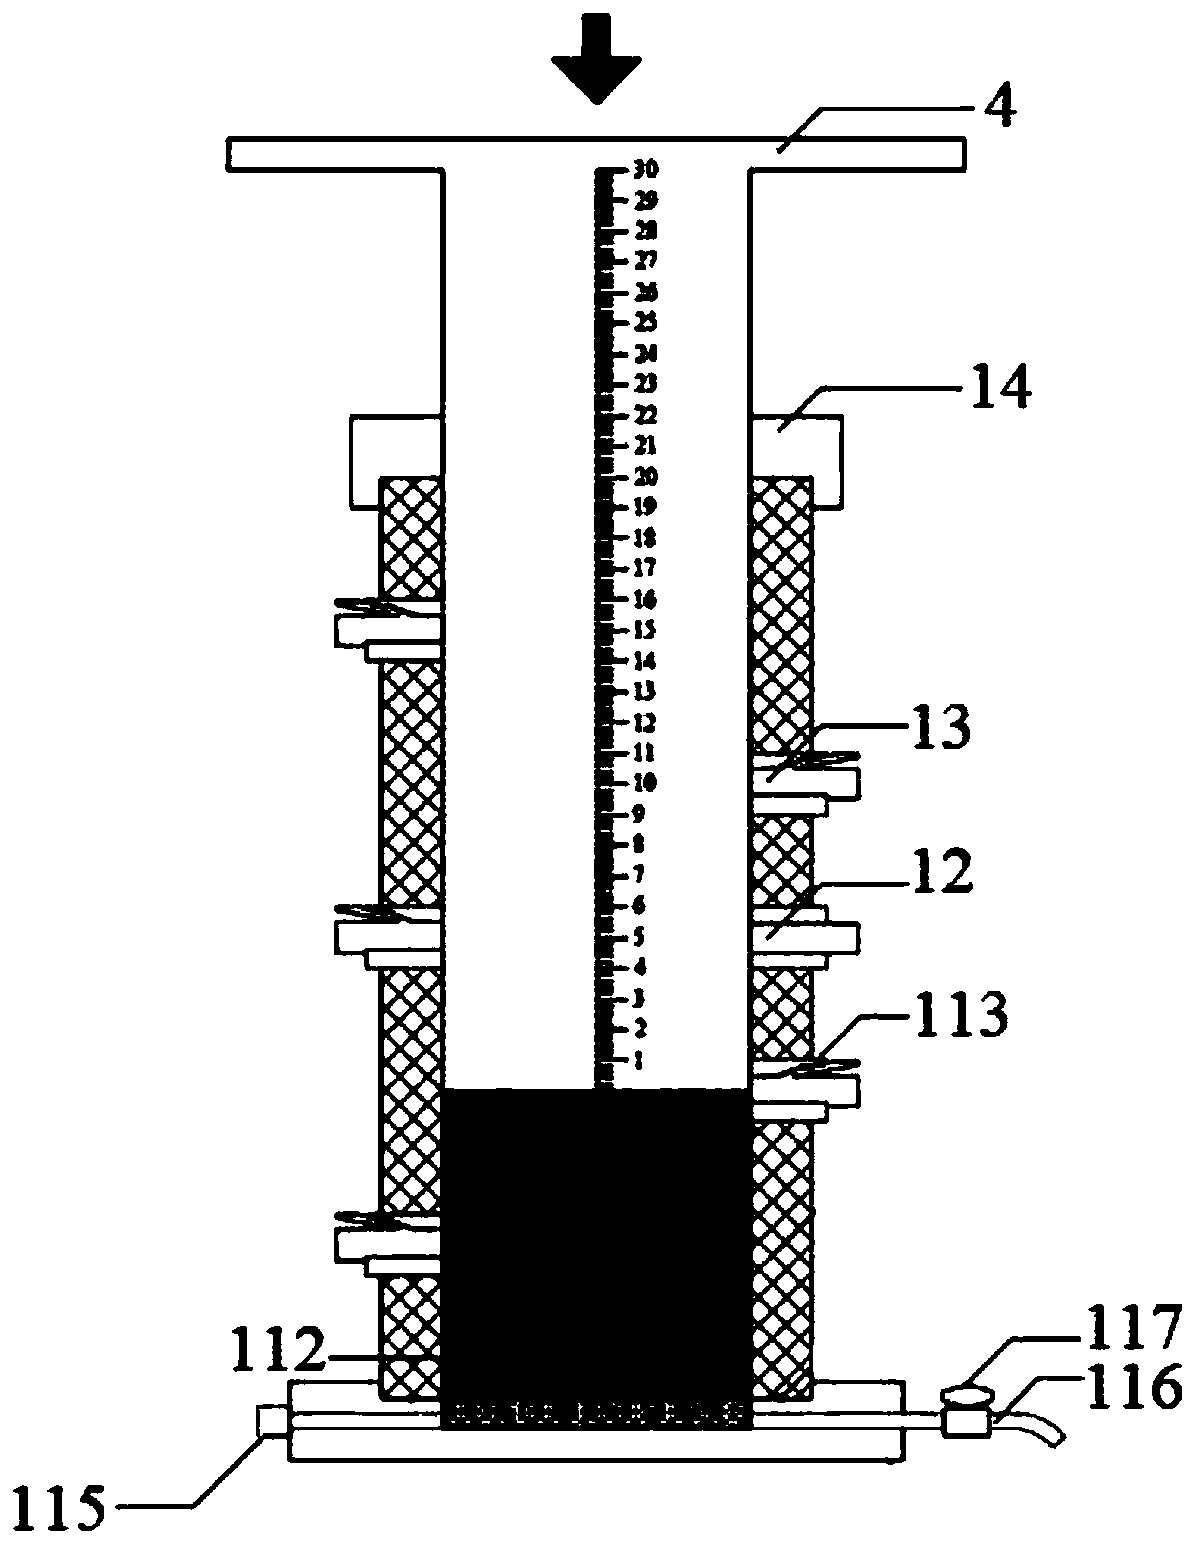 Measurement system for unsaturated infiltration coefficient of subgrade soil and related measurement method of system